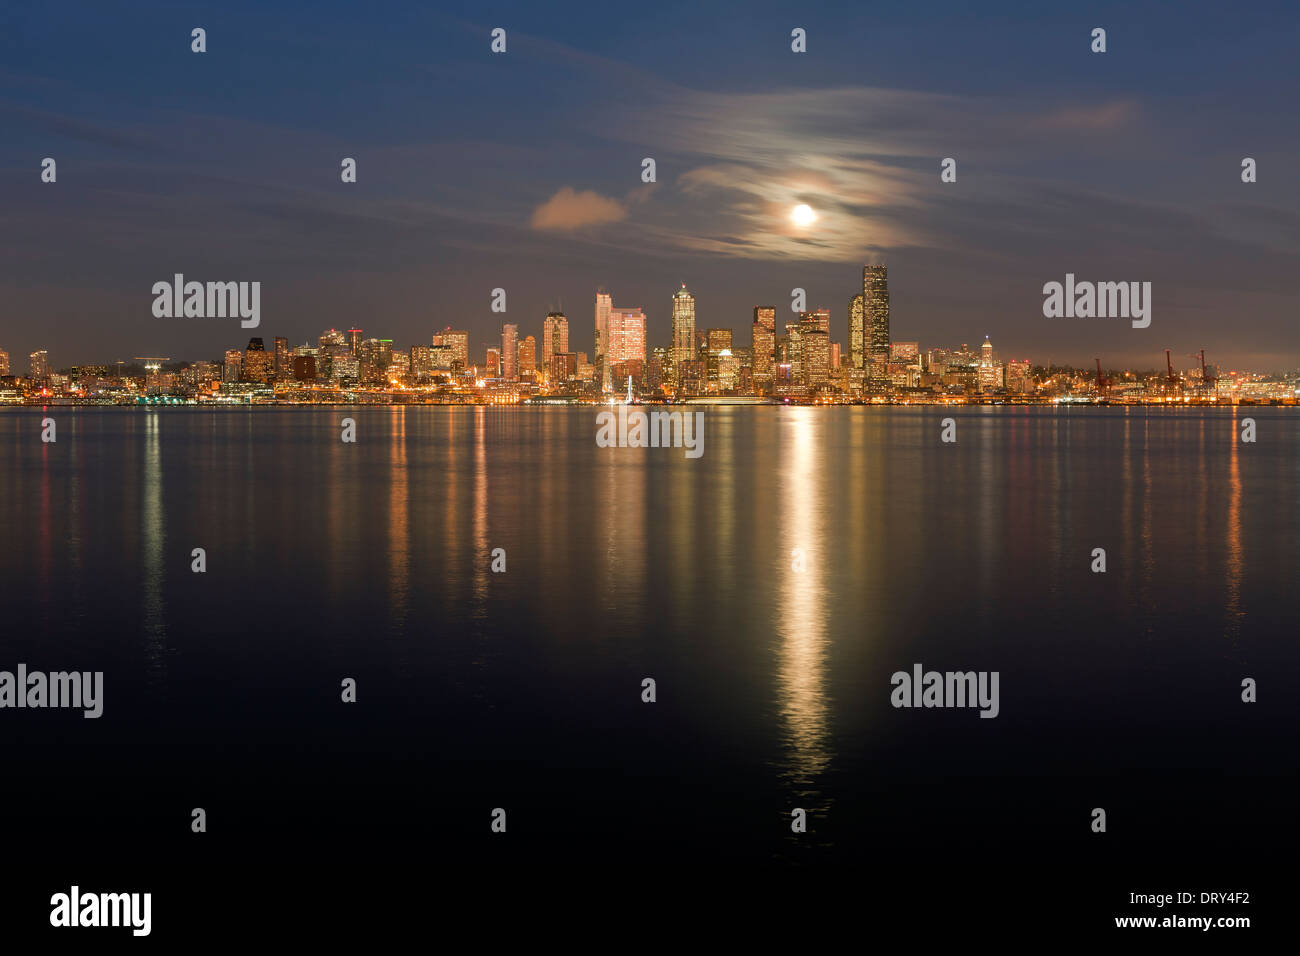 WASHINGTON - Moon rise over the city of Seattle viewed from West Seattle across Elliot Bay. 2013 Stock Photo